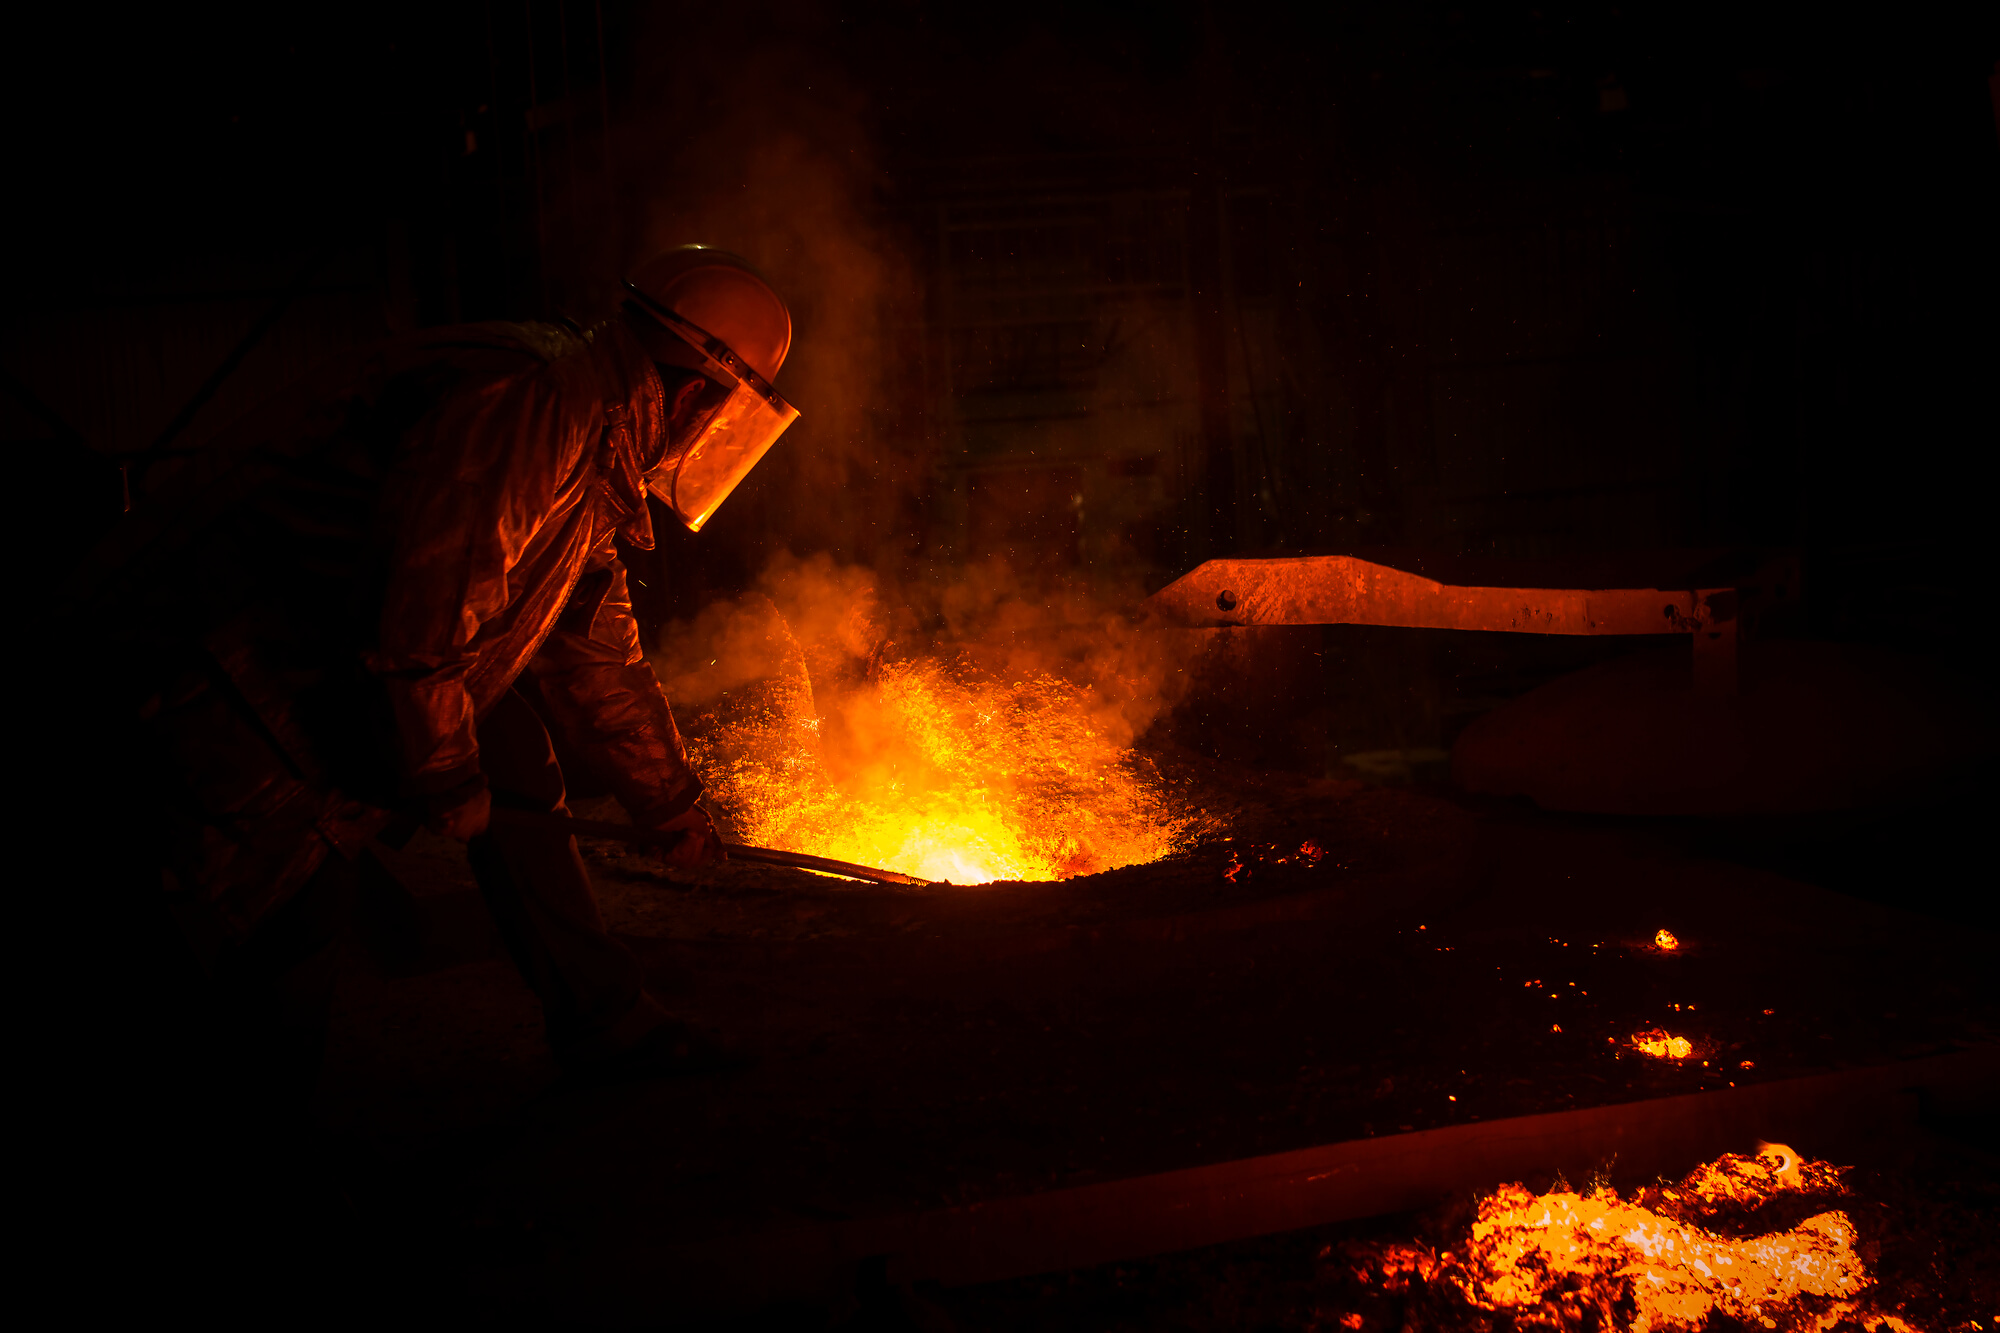 Steel Castings vs. Cast Irons: Which Is Better?